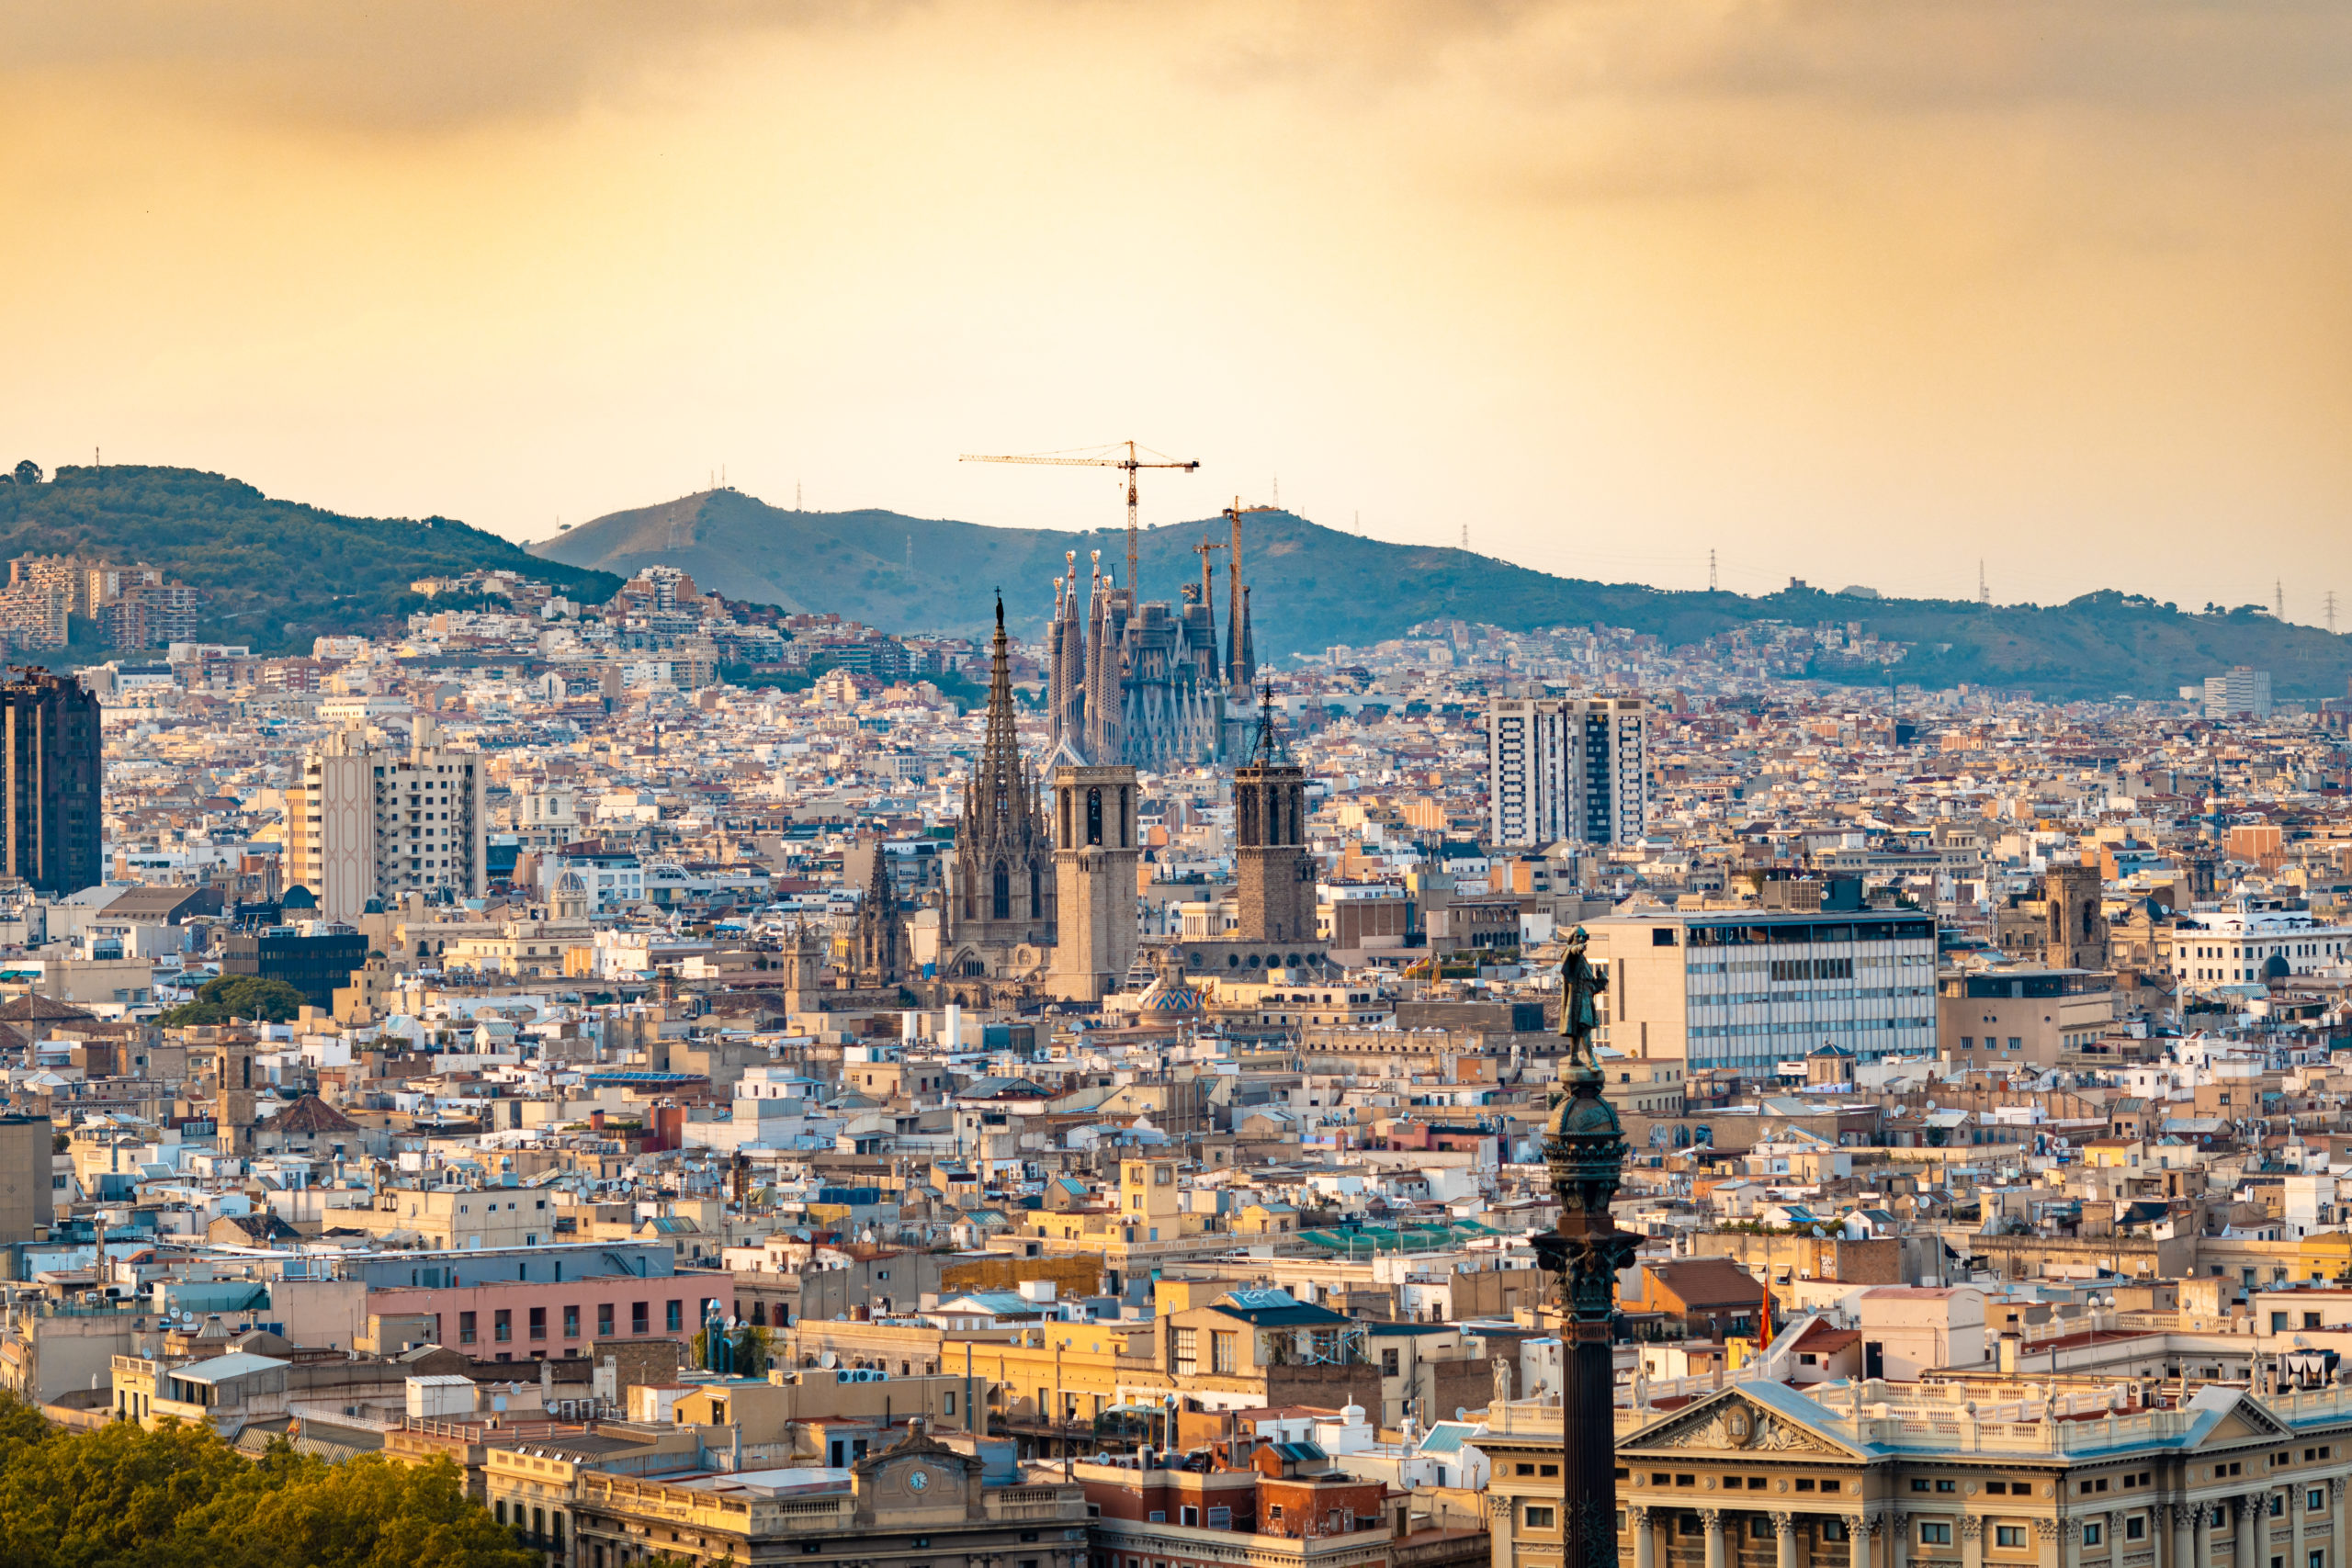 4YFN returns to the heart of MWC Barcelona